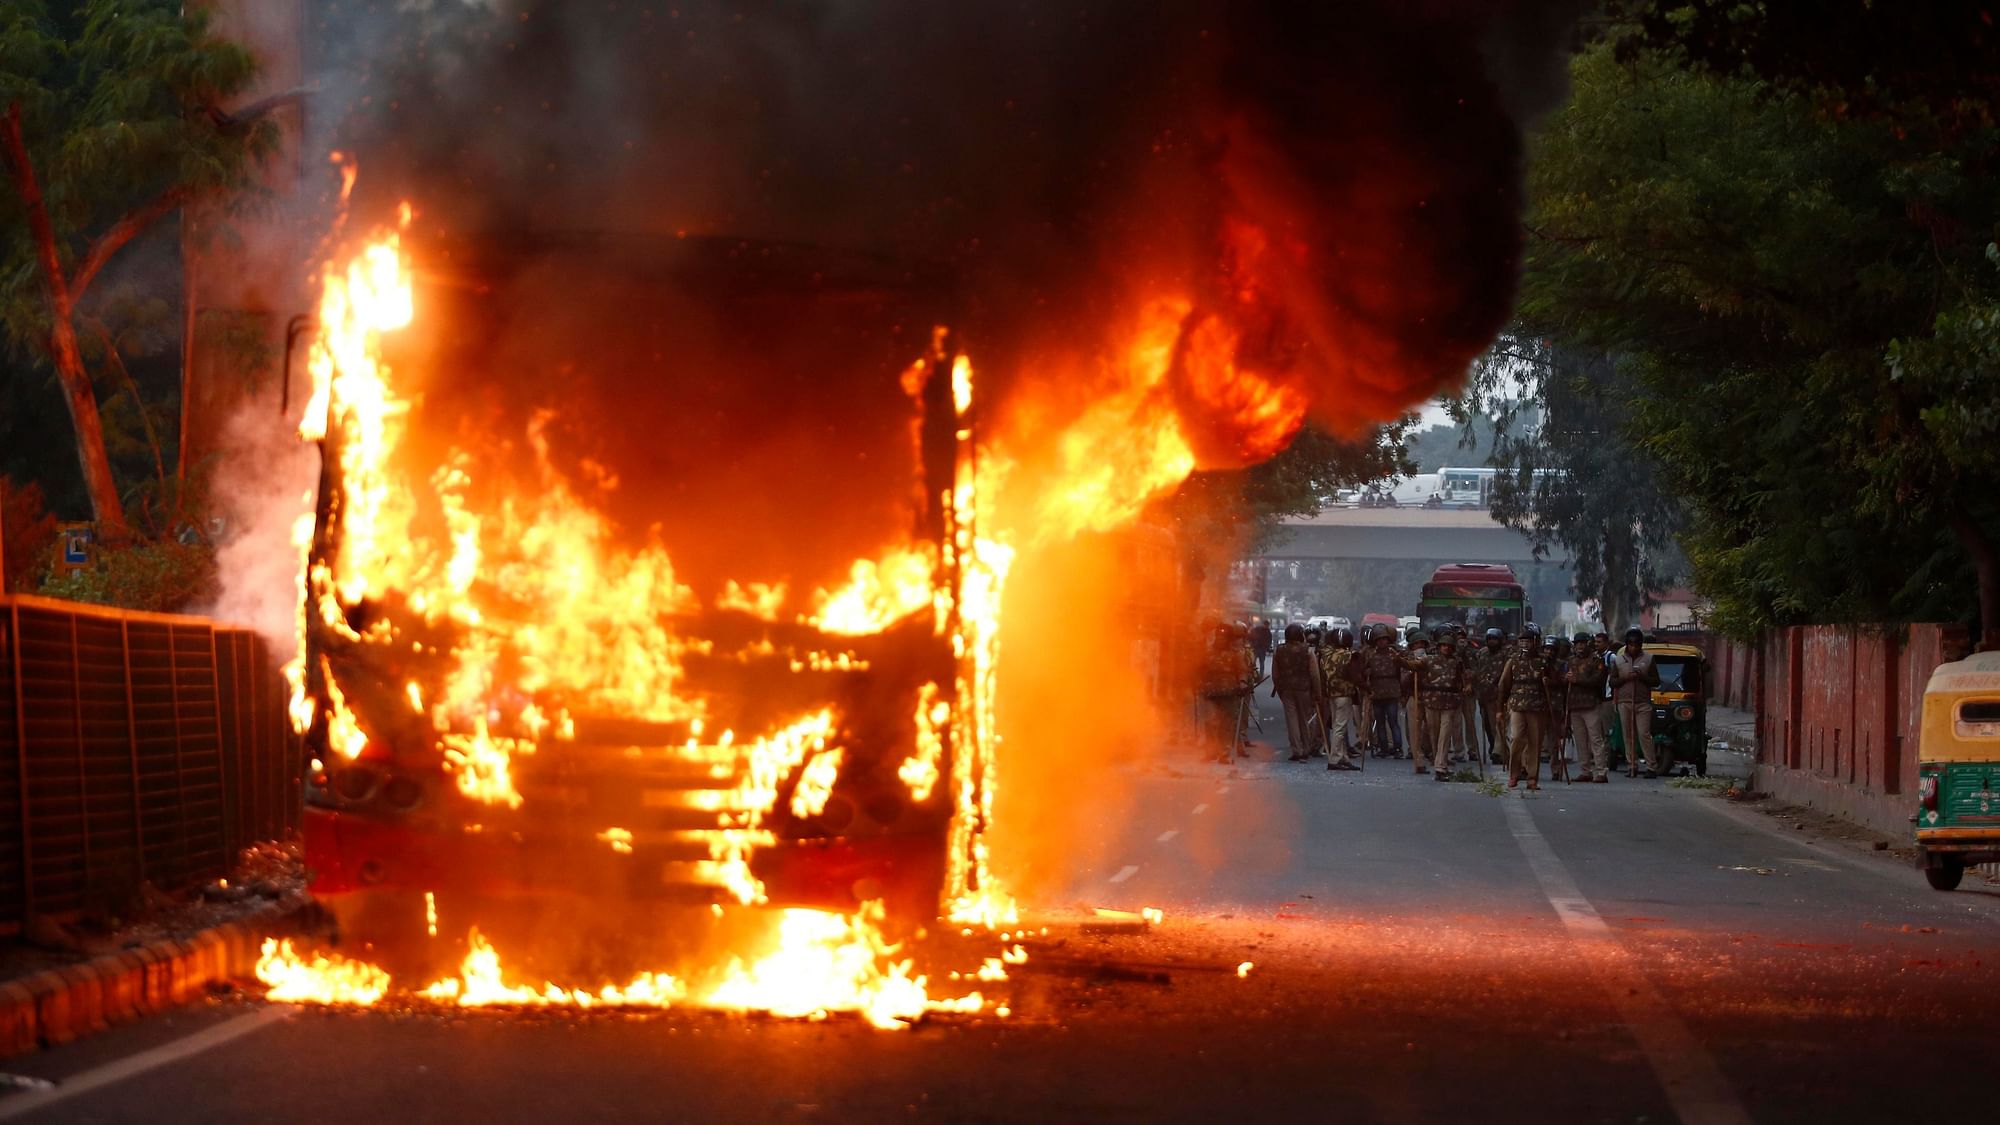 A passenger bus goes up in flames during a protest against Citizenship (Amendment) Act in New Delhi.